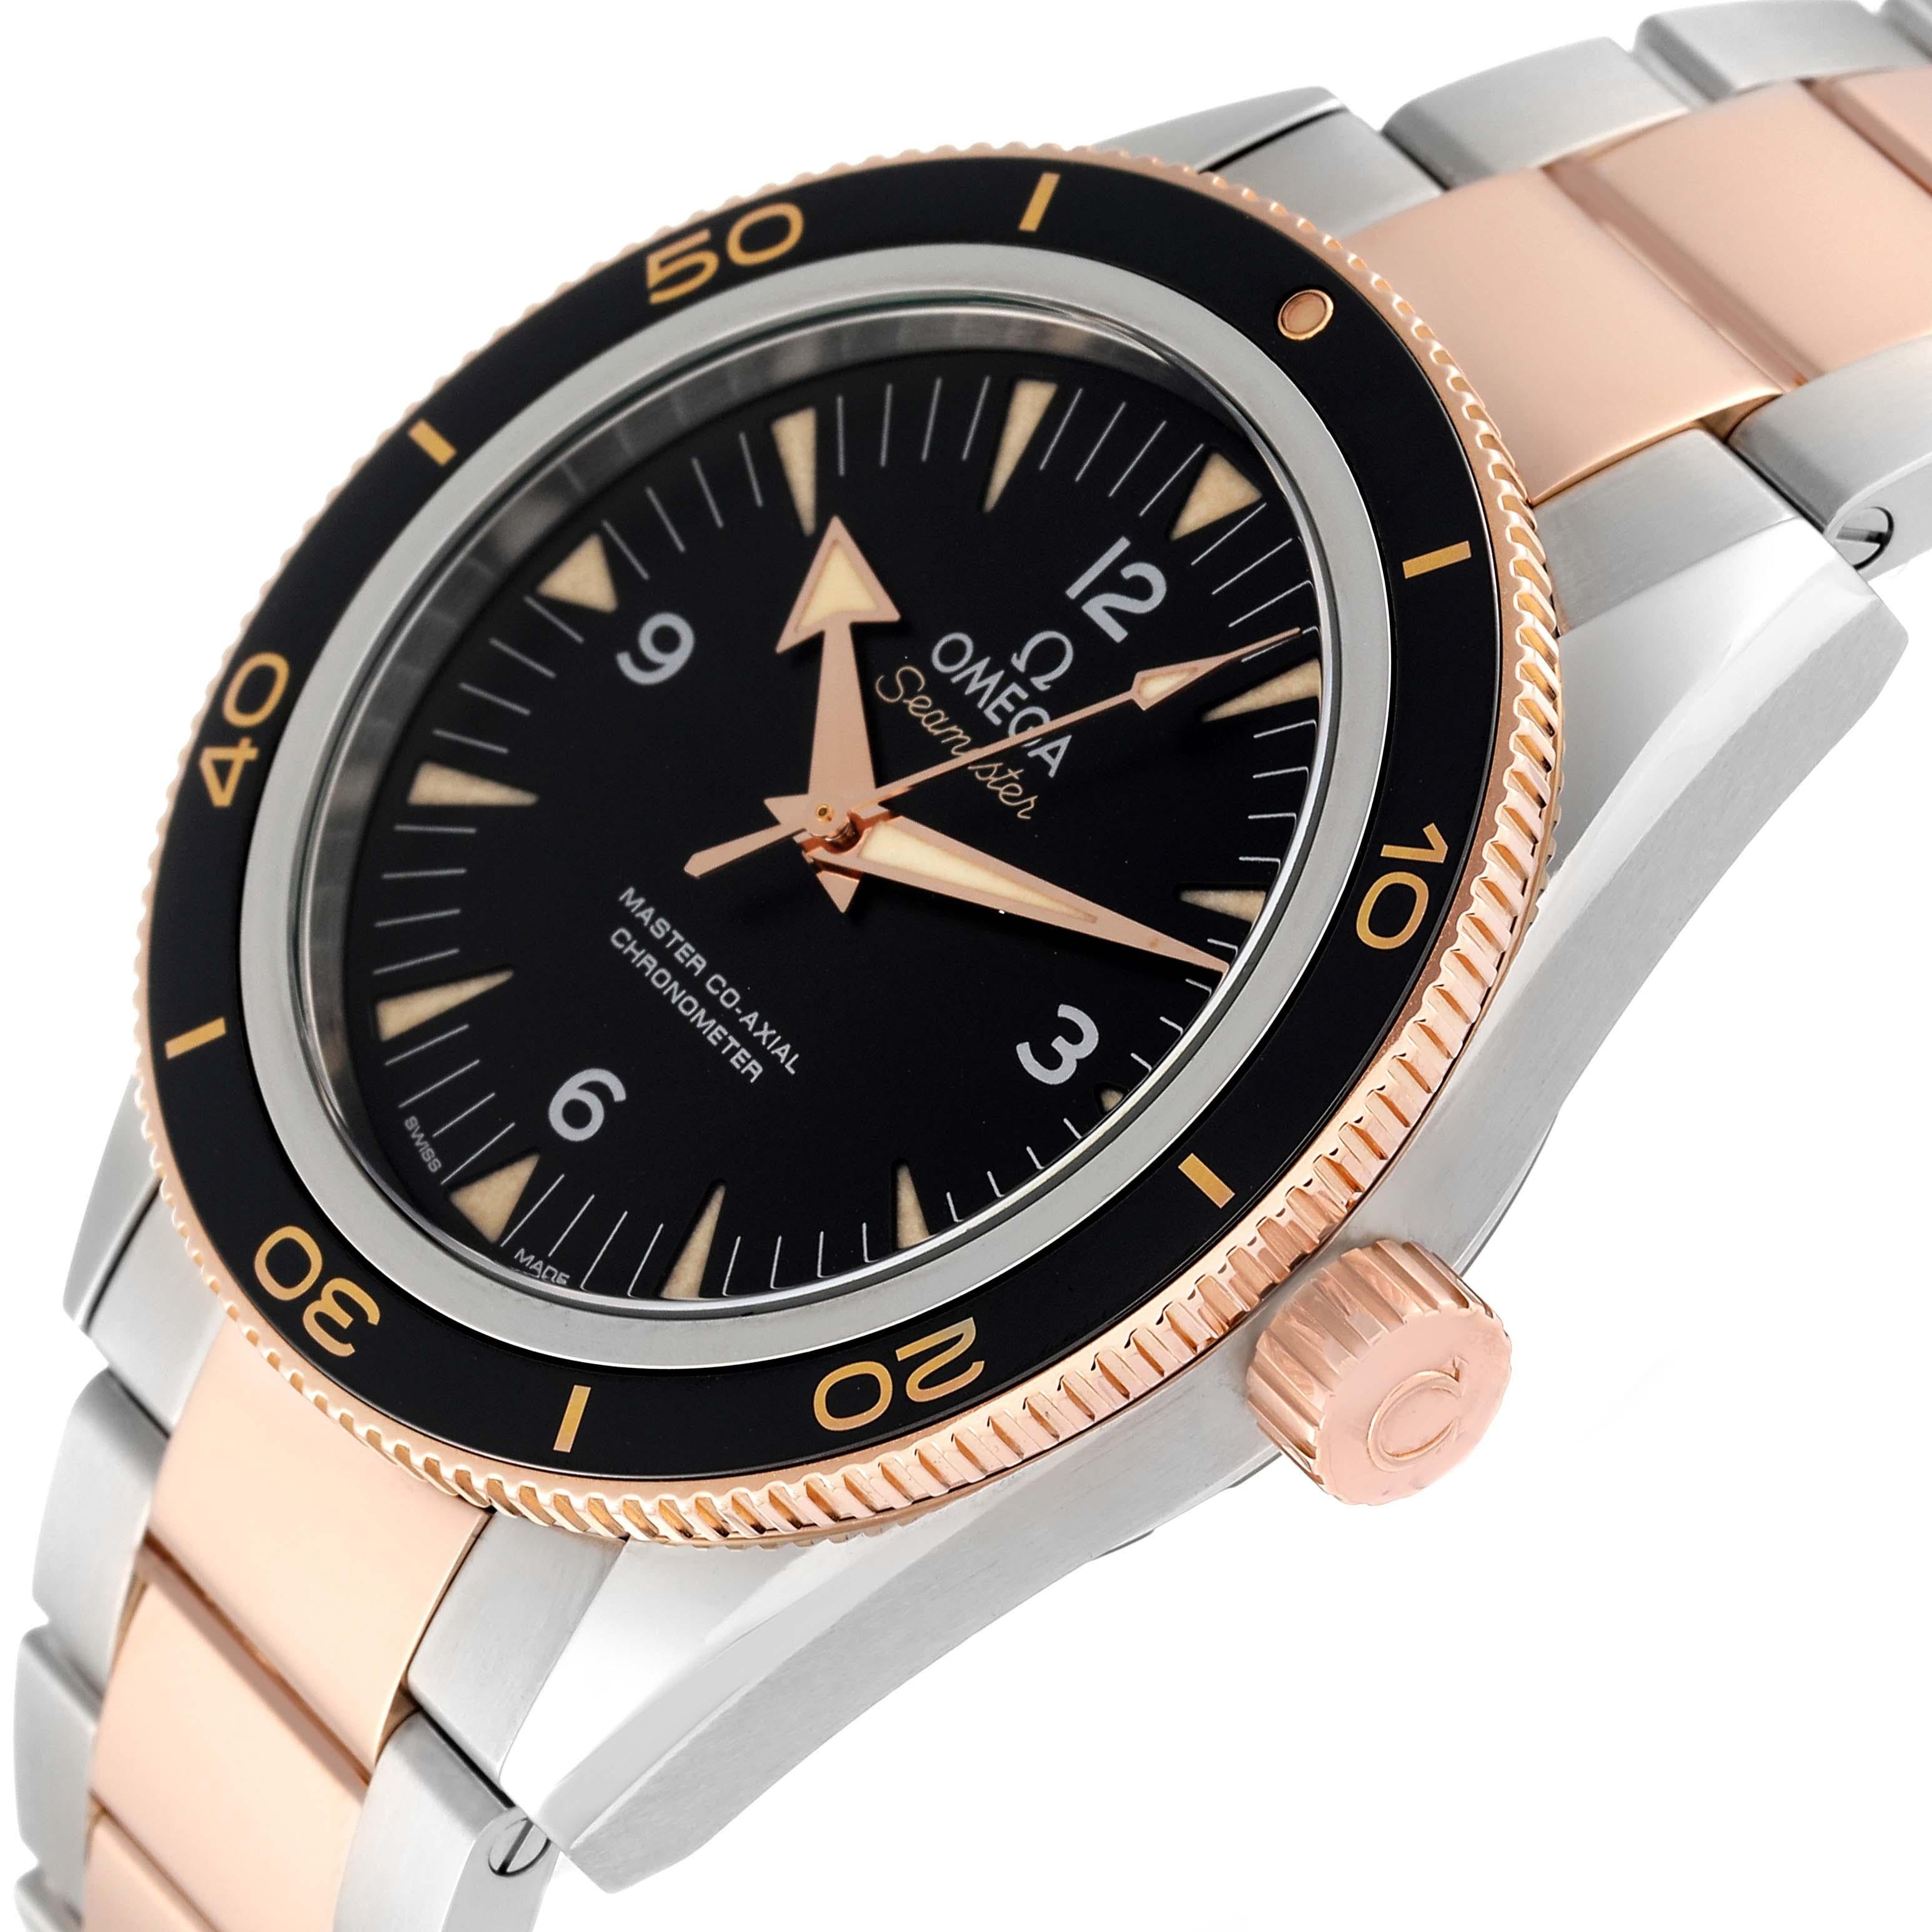 Men's Omega Seamaster 300M Co-Axial Steel Rose Gold Watch 233.20.41.21.01.001 For Sale